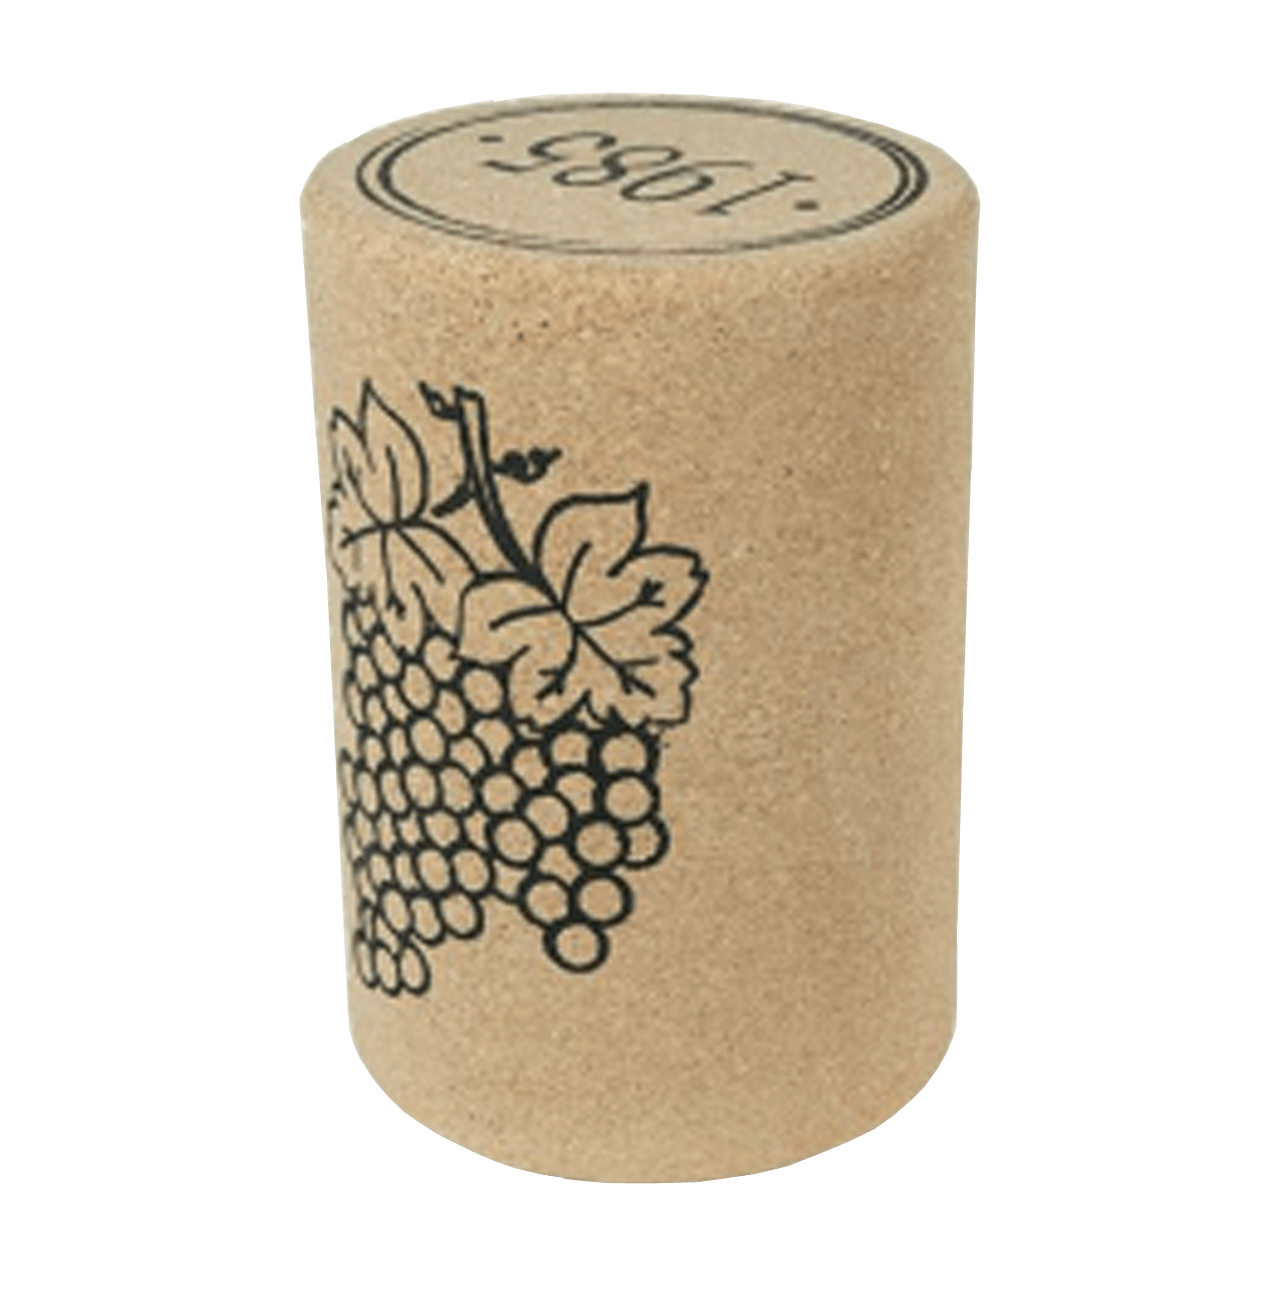 Cork stool with the printing of "1985" on top and a grapevine design on one side.